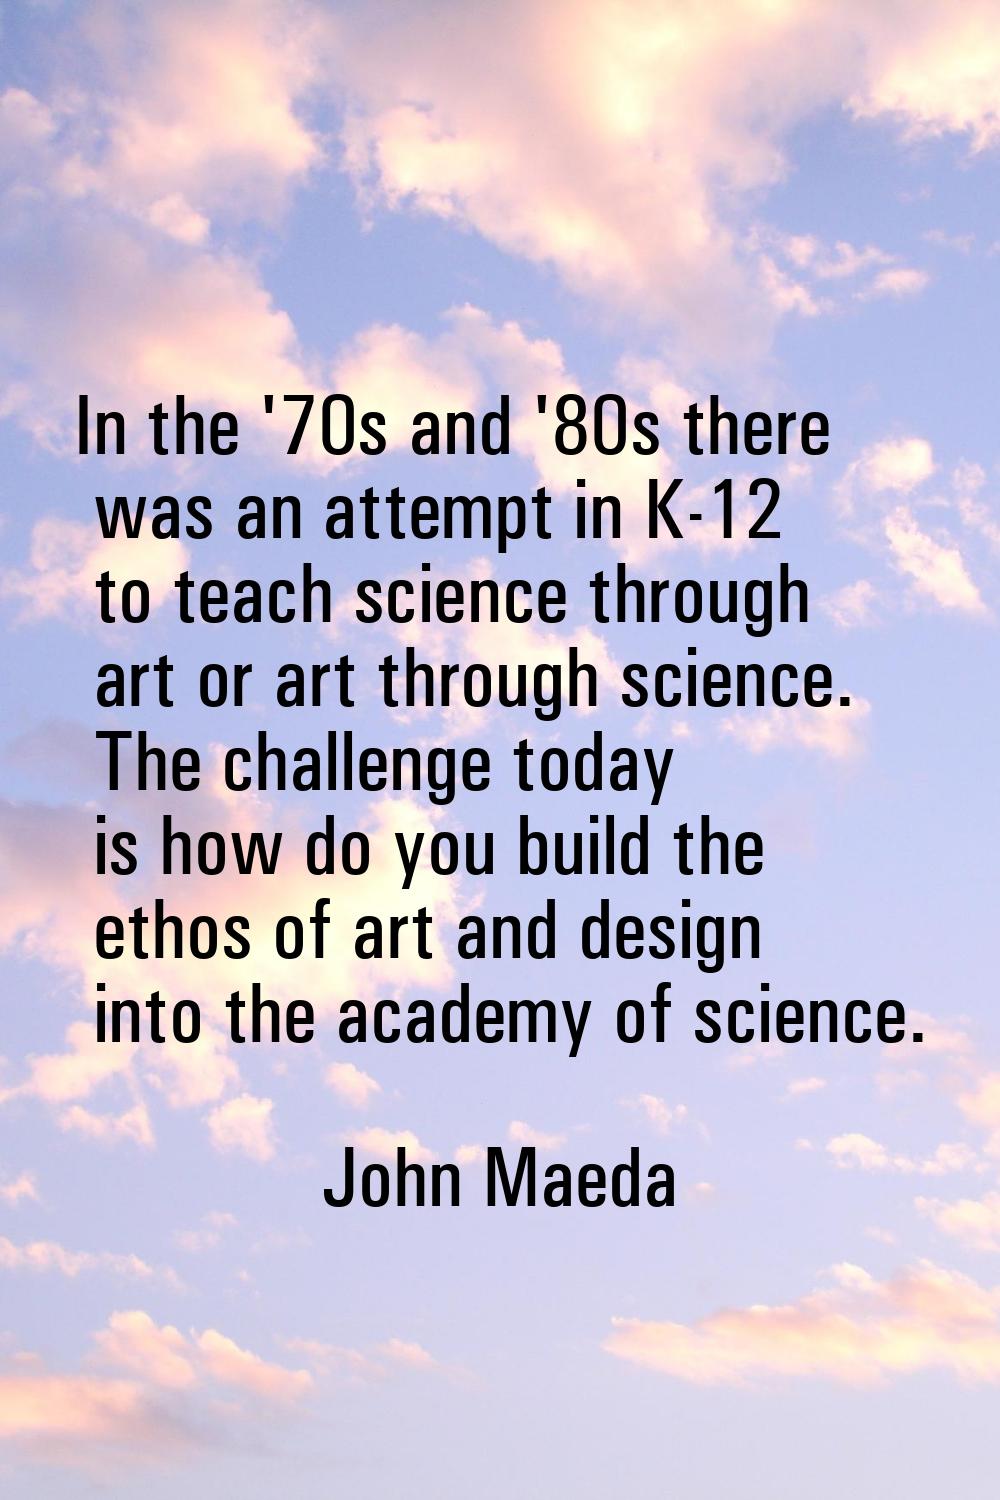 In the '70s and '80s there was an attempt in K-12 to teach science through art or art through scien